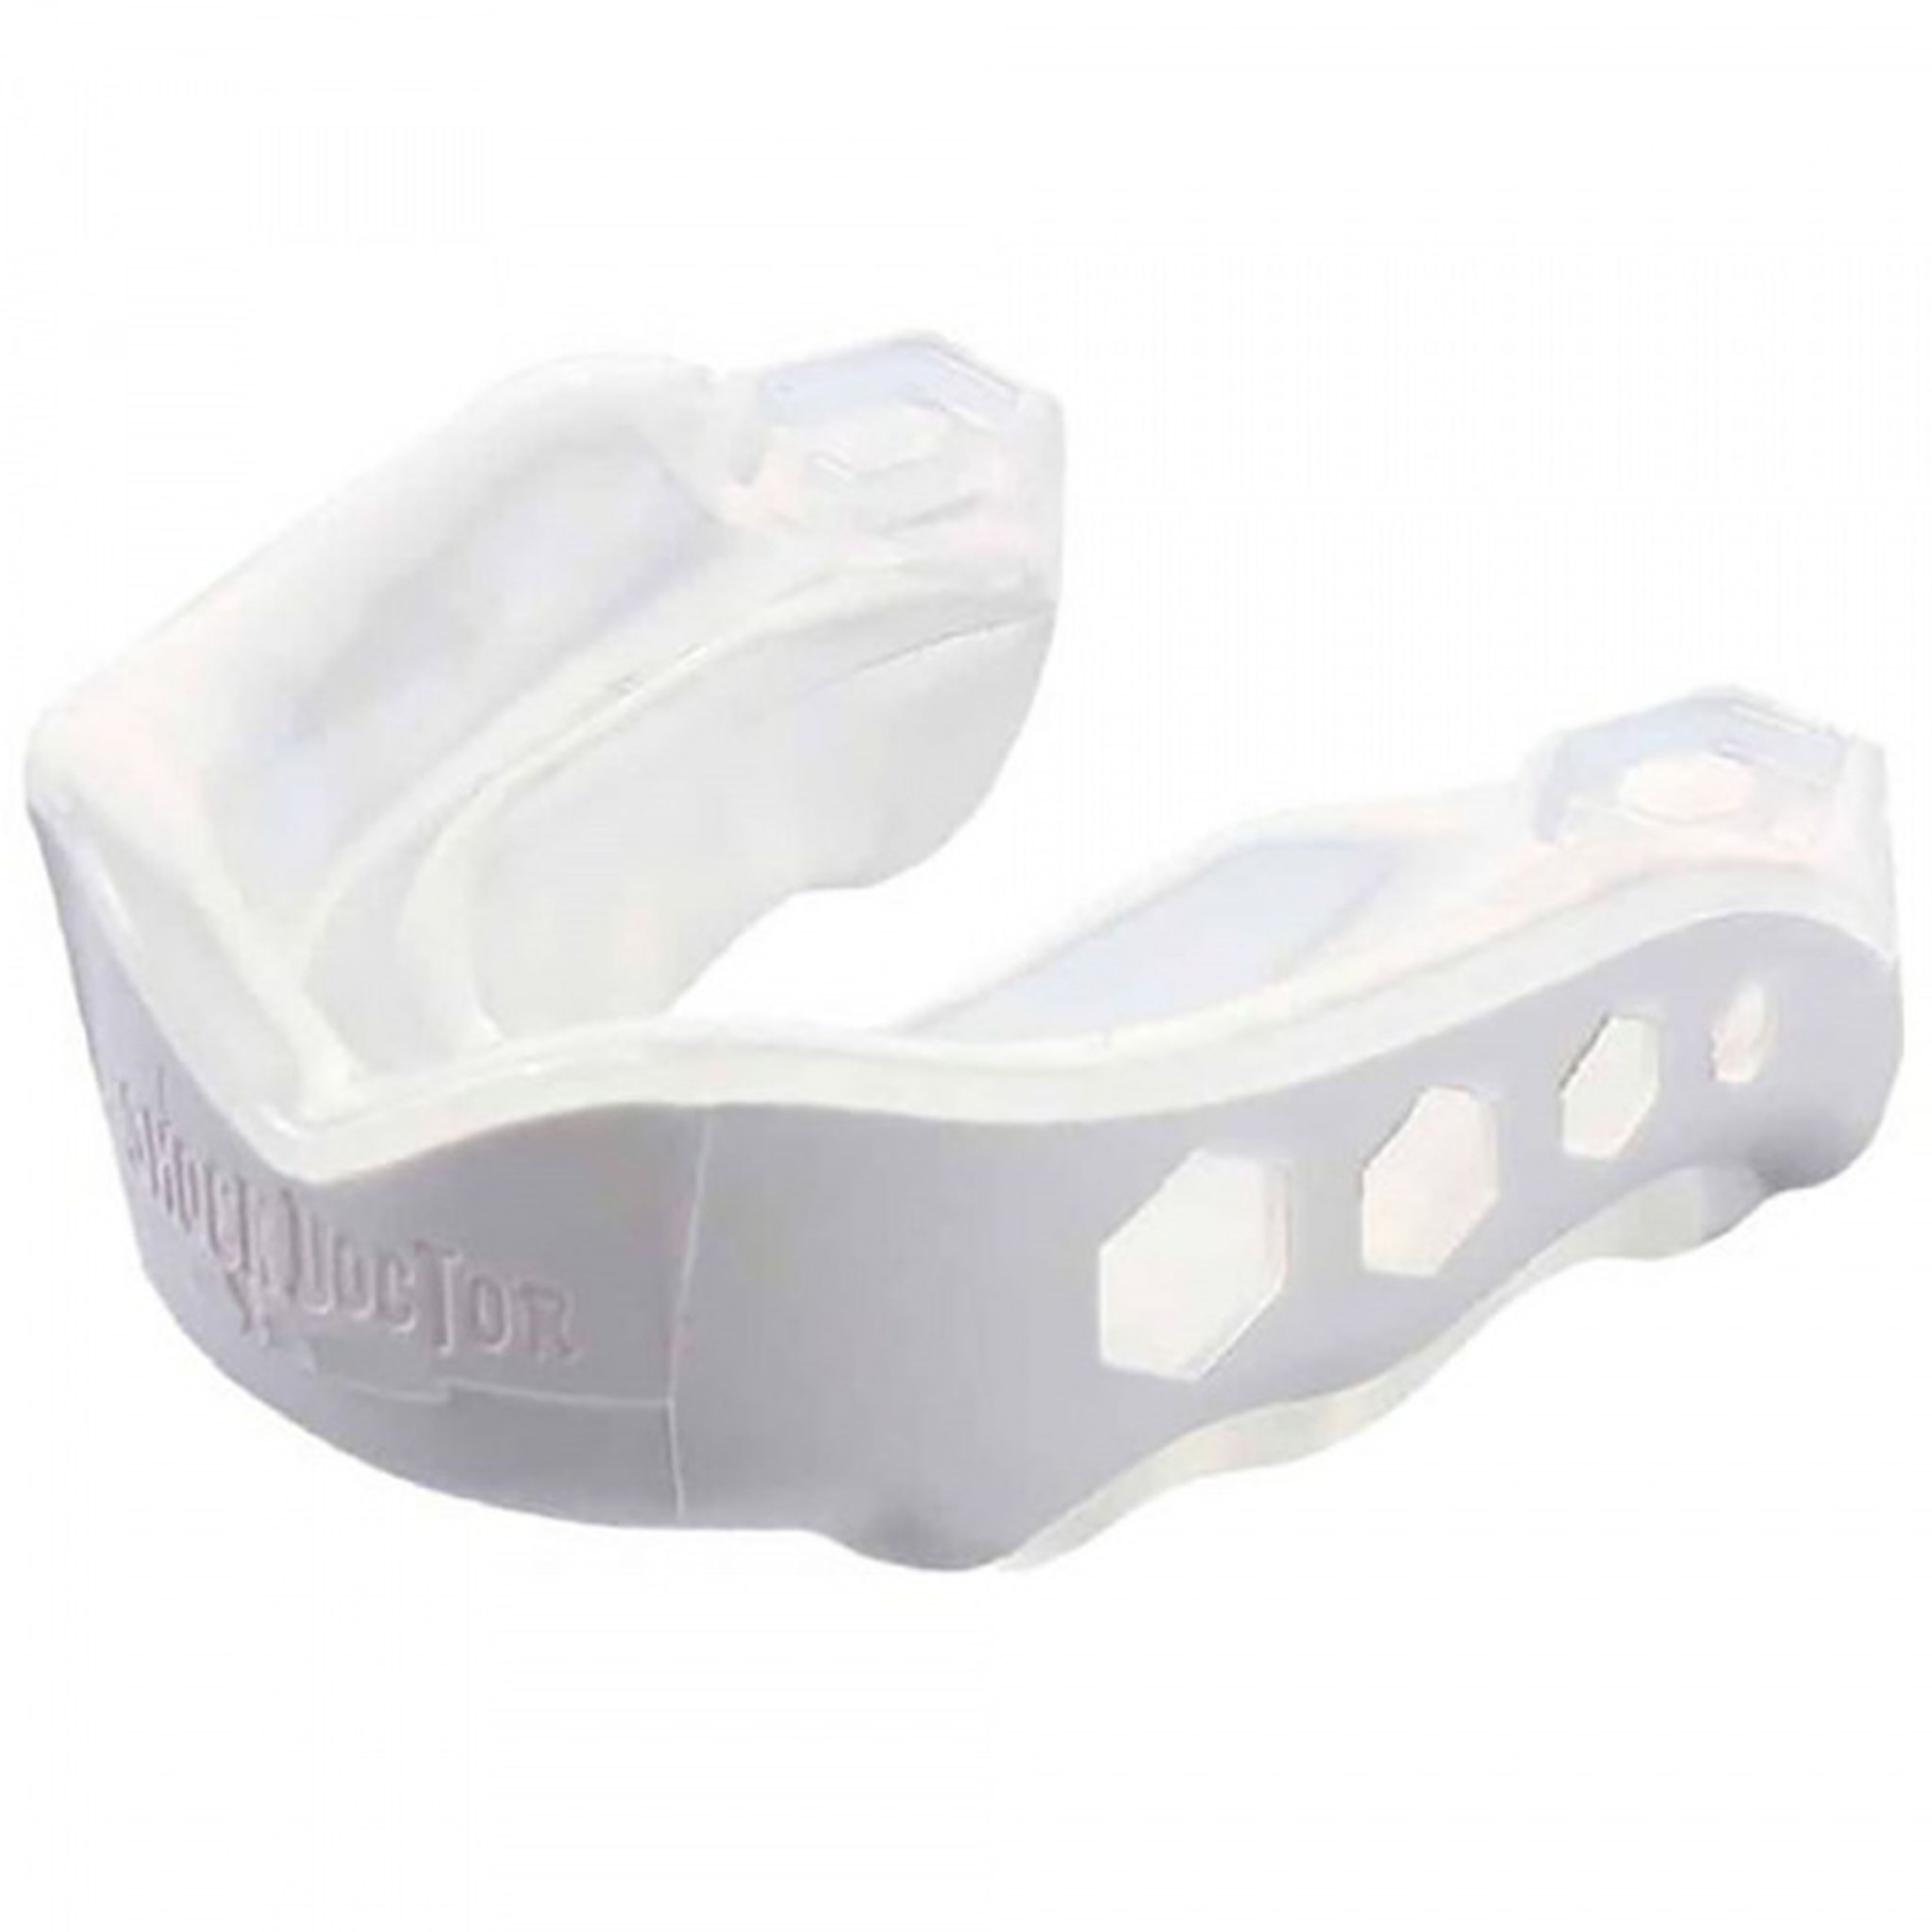 Shock Doctor GEL Max Adult Mouthguard